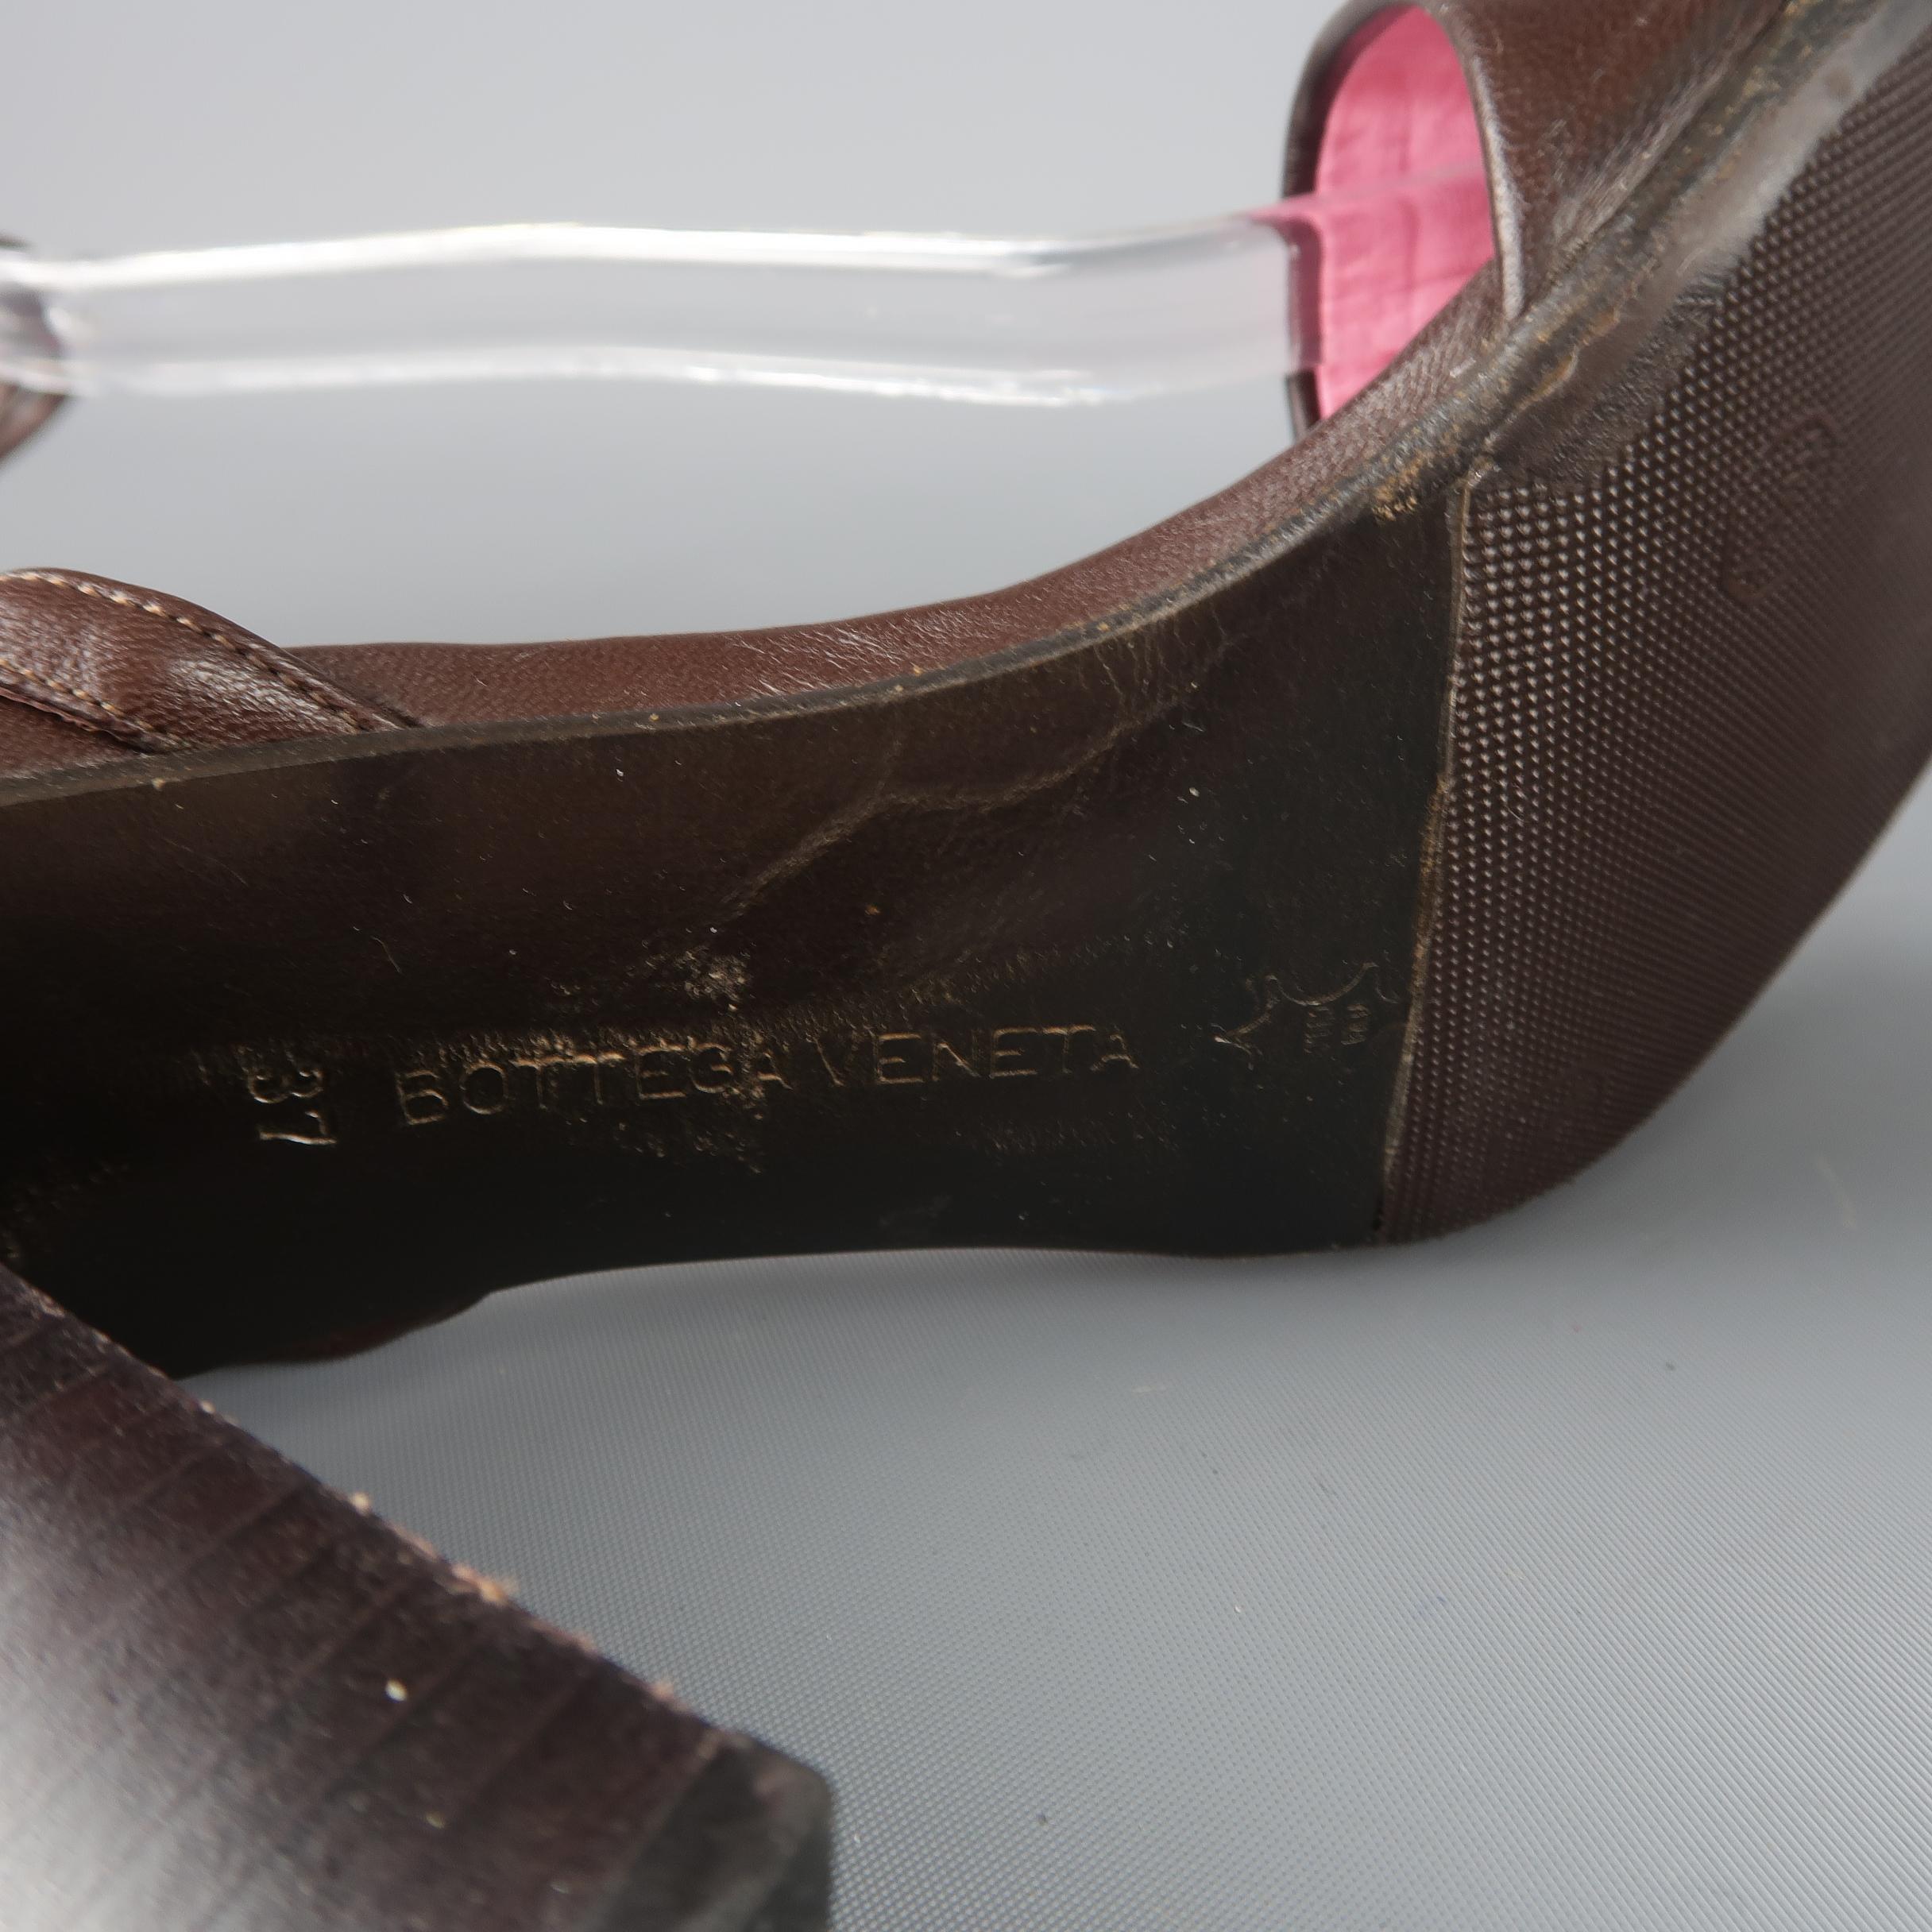 BOTTEGA VENETA Heels - Size US 7 Brown & Pink Leather Ankle Tie Sandals In Good Condition In San Francisco, CA